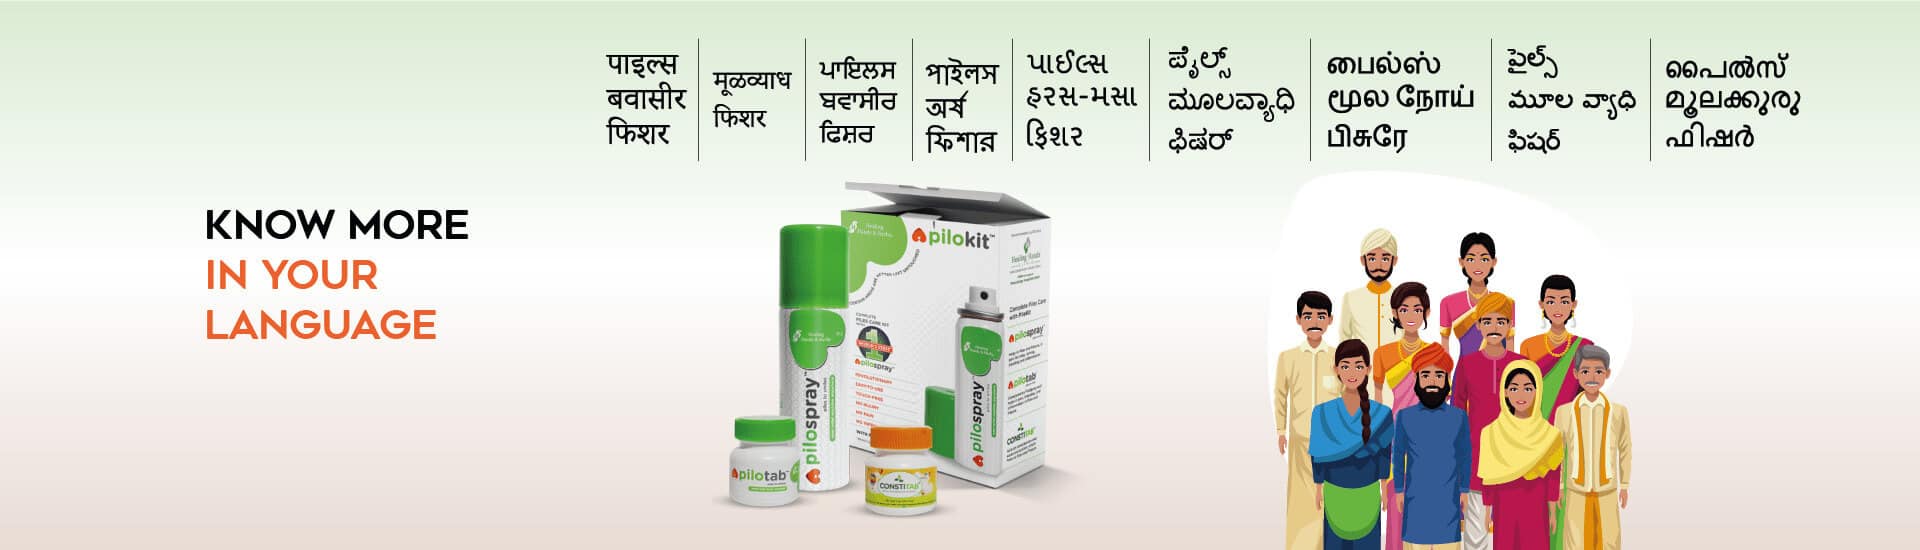 PiloKit Complete Piles and Fissure Treatment Kit Information in Multiple Languages of India - Homepage Banner Desktop